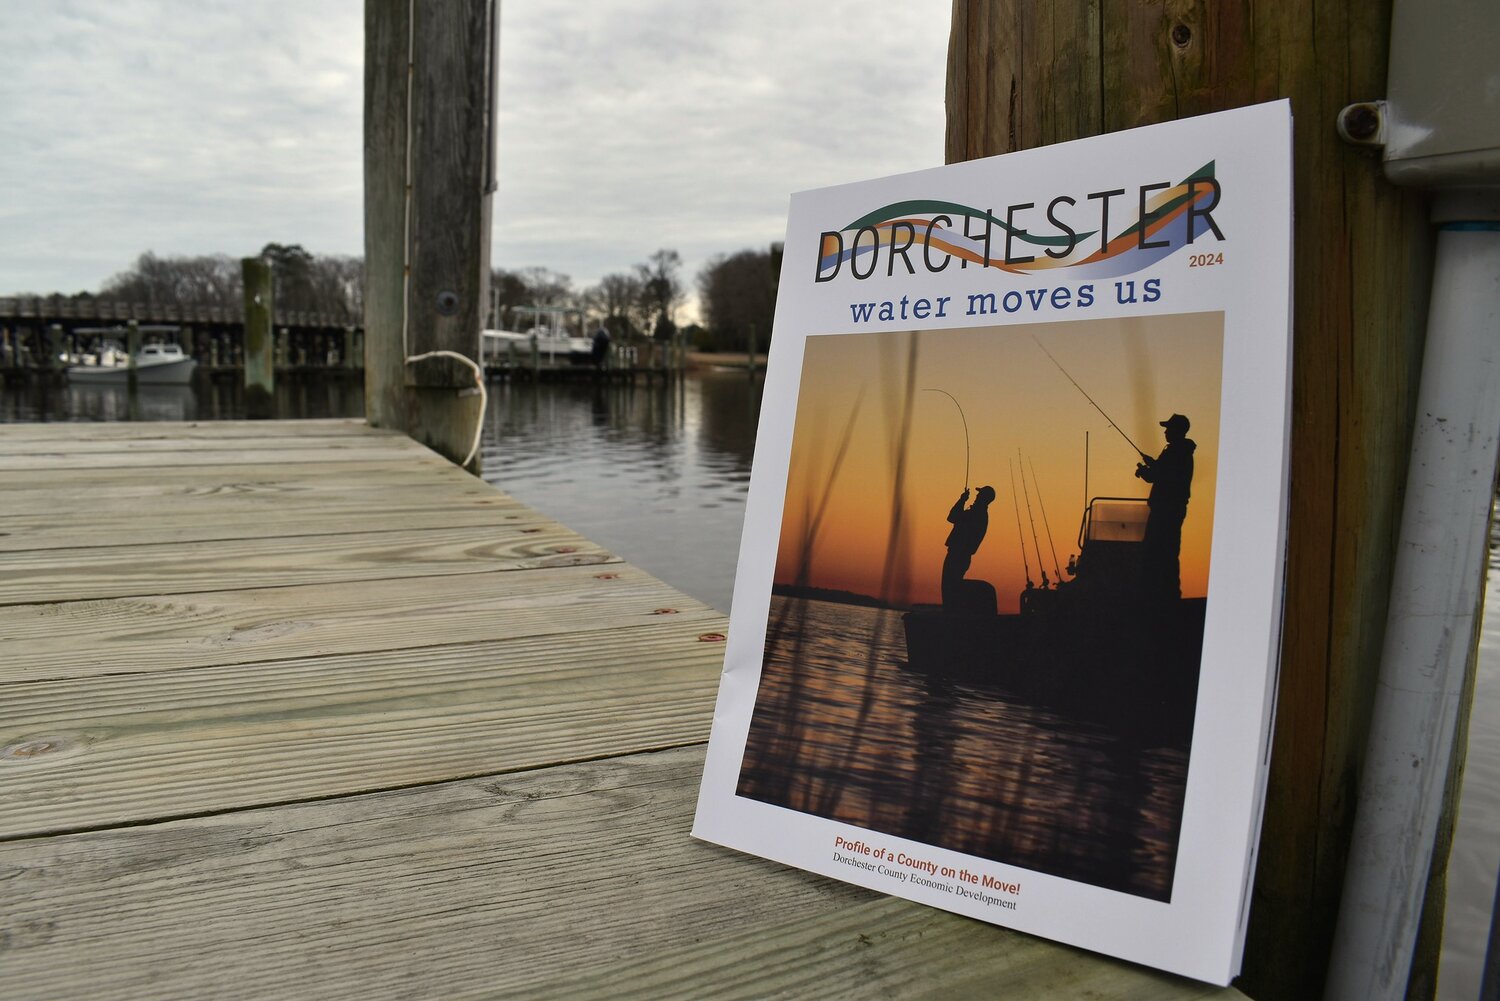 Dorchester Water Moves Us magazine in 2024.